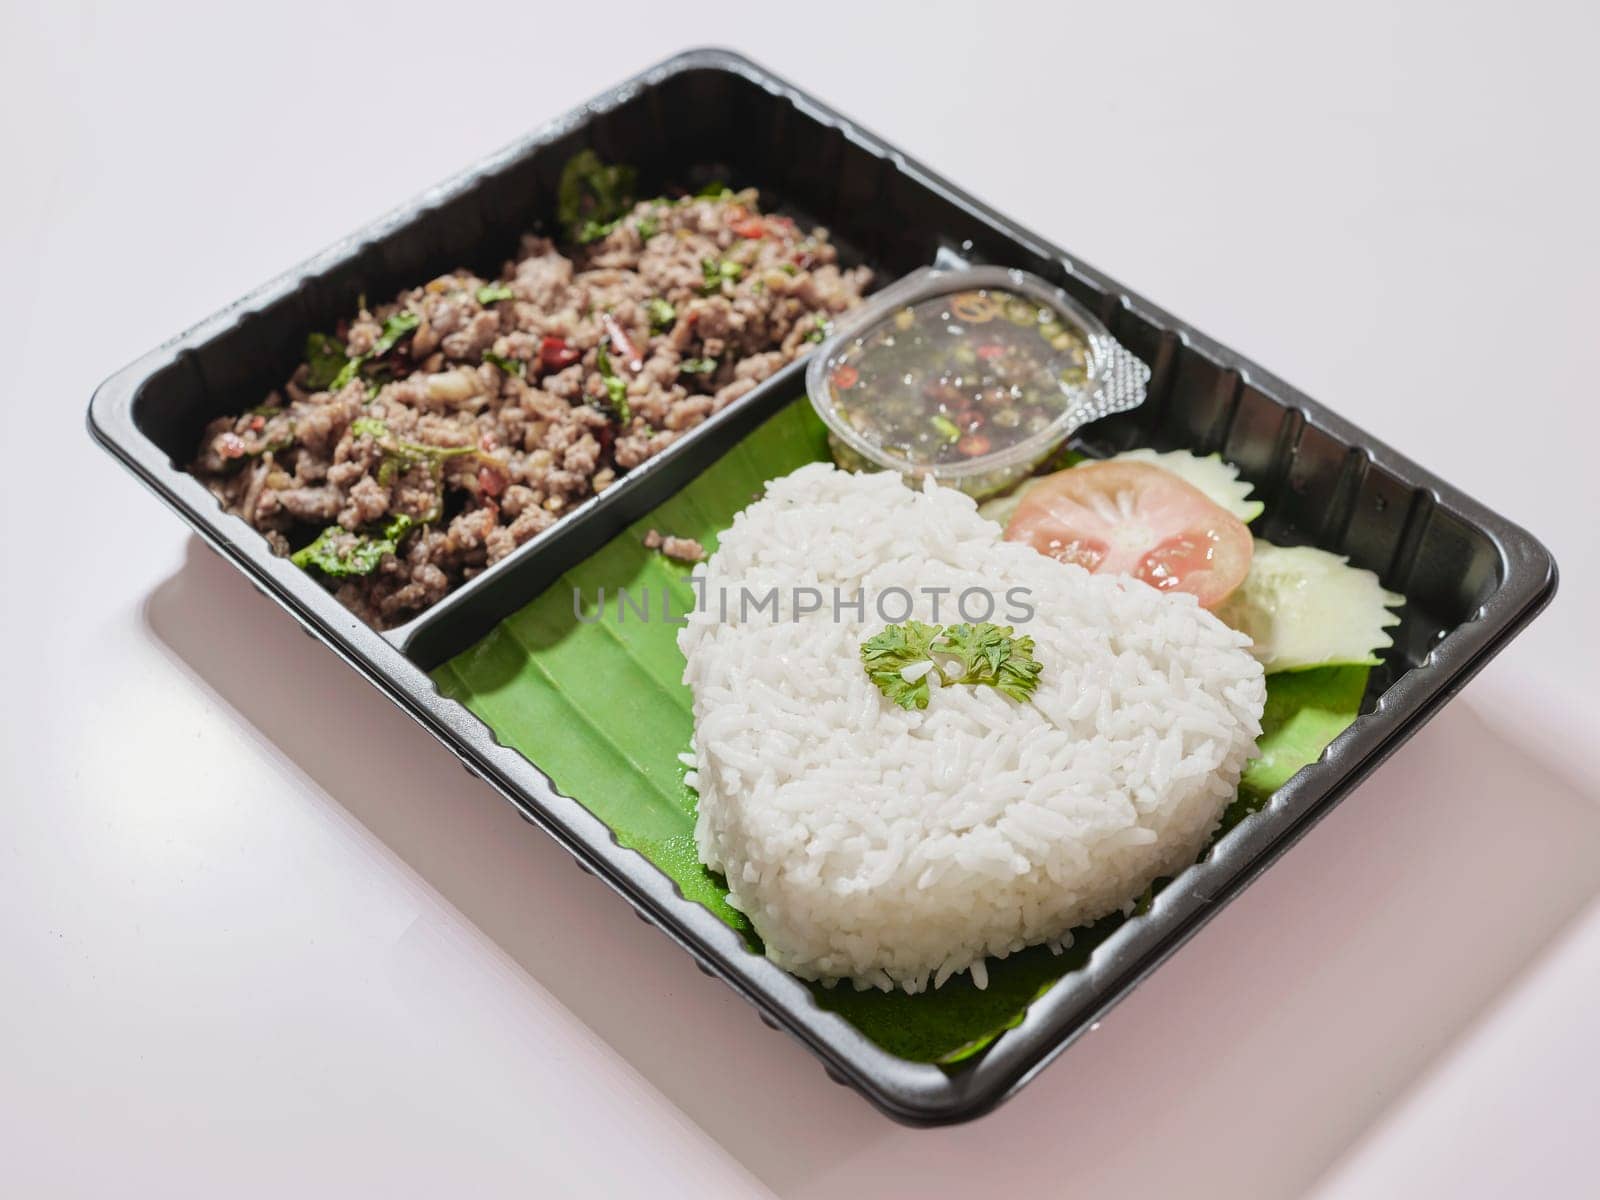 Basil fried rice with pork in plastic box at street market  by Hepjam